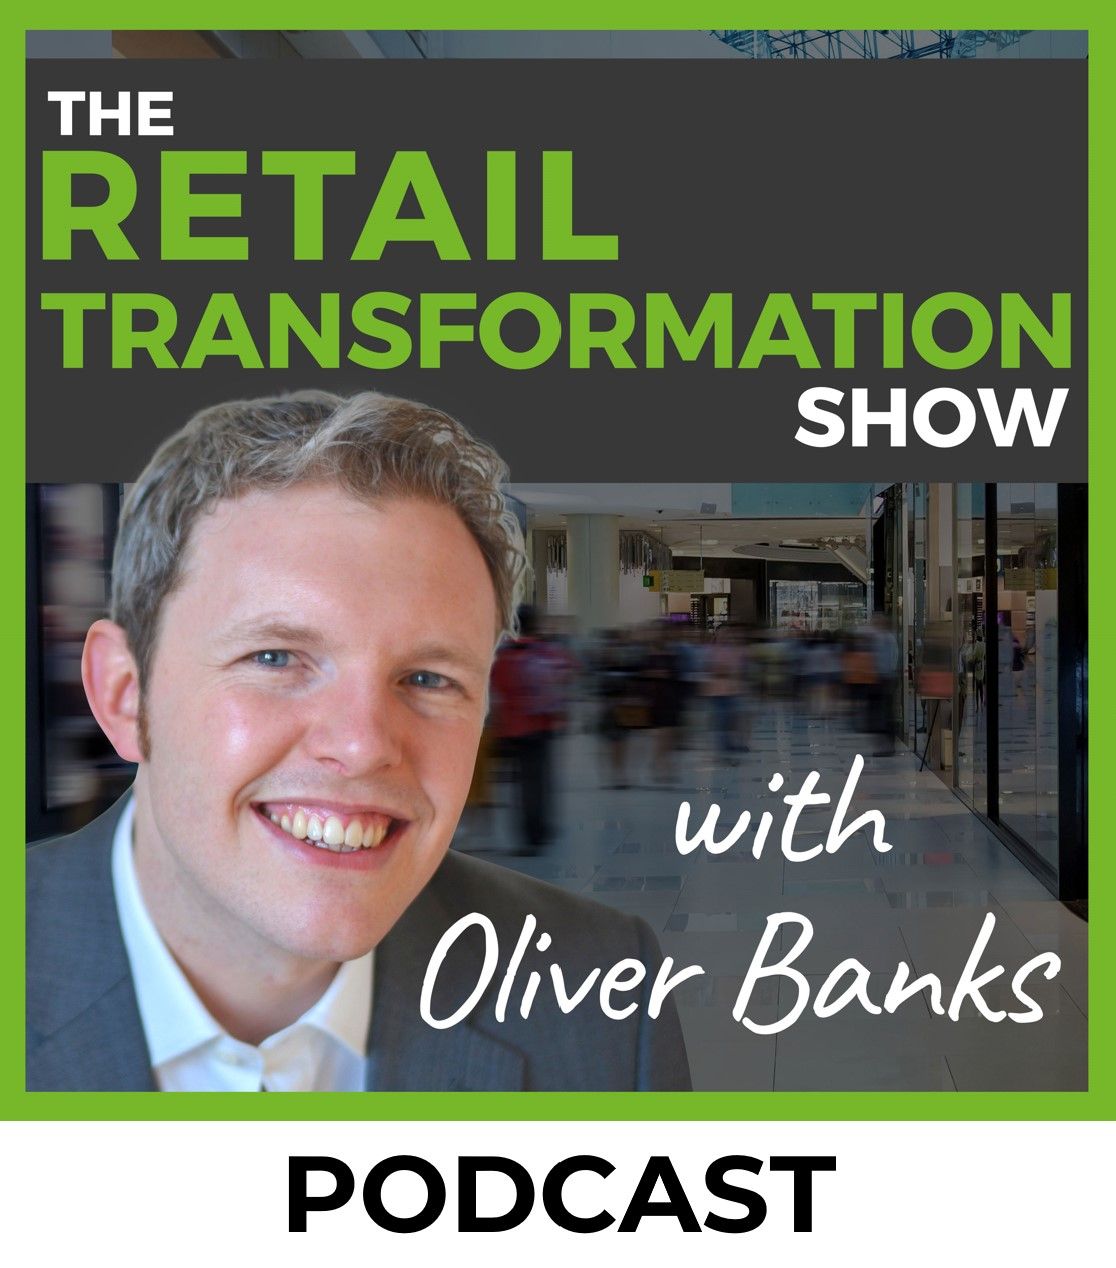 The Retail Transformation Show Podcast with Oliver Banks